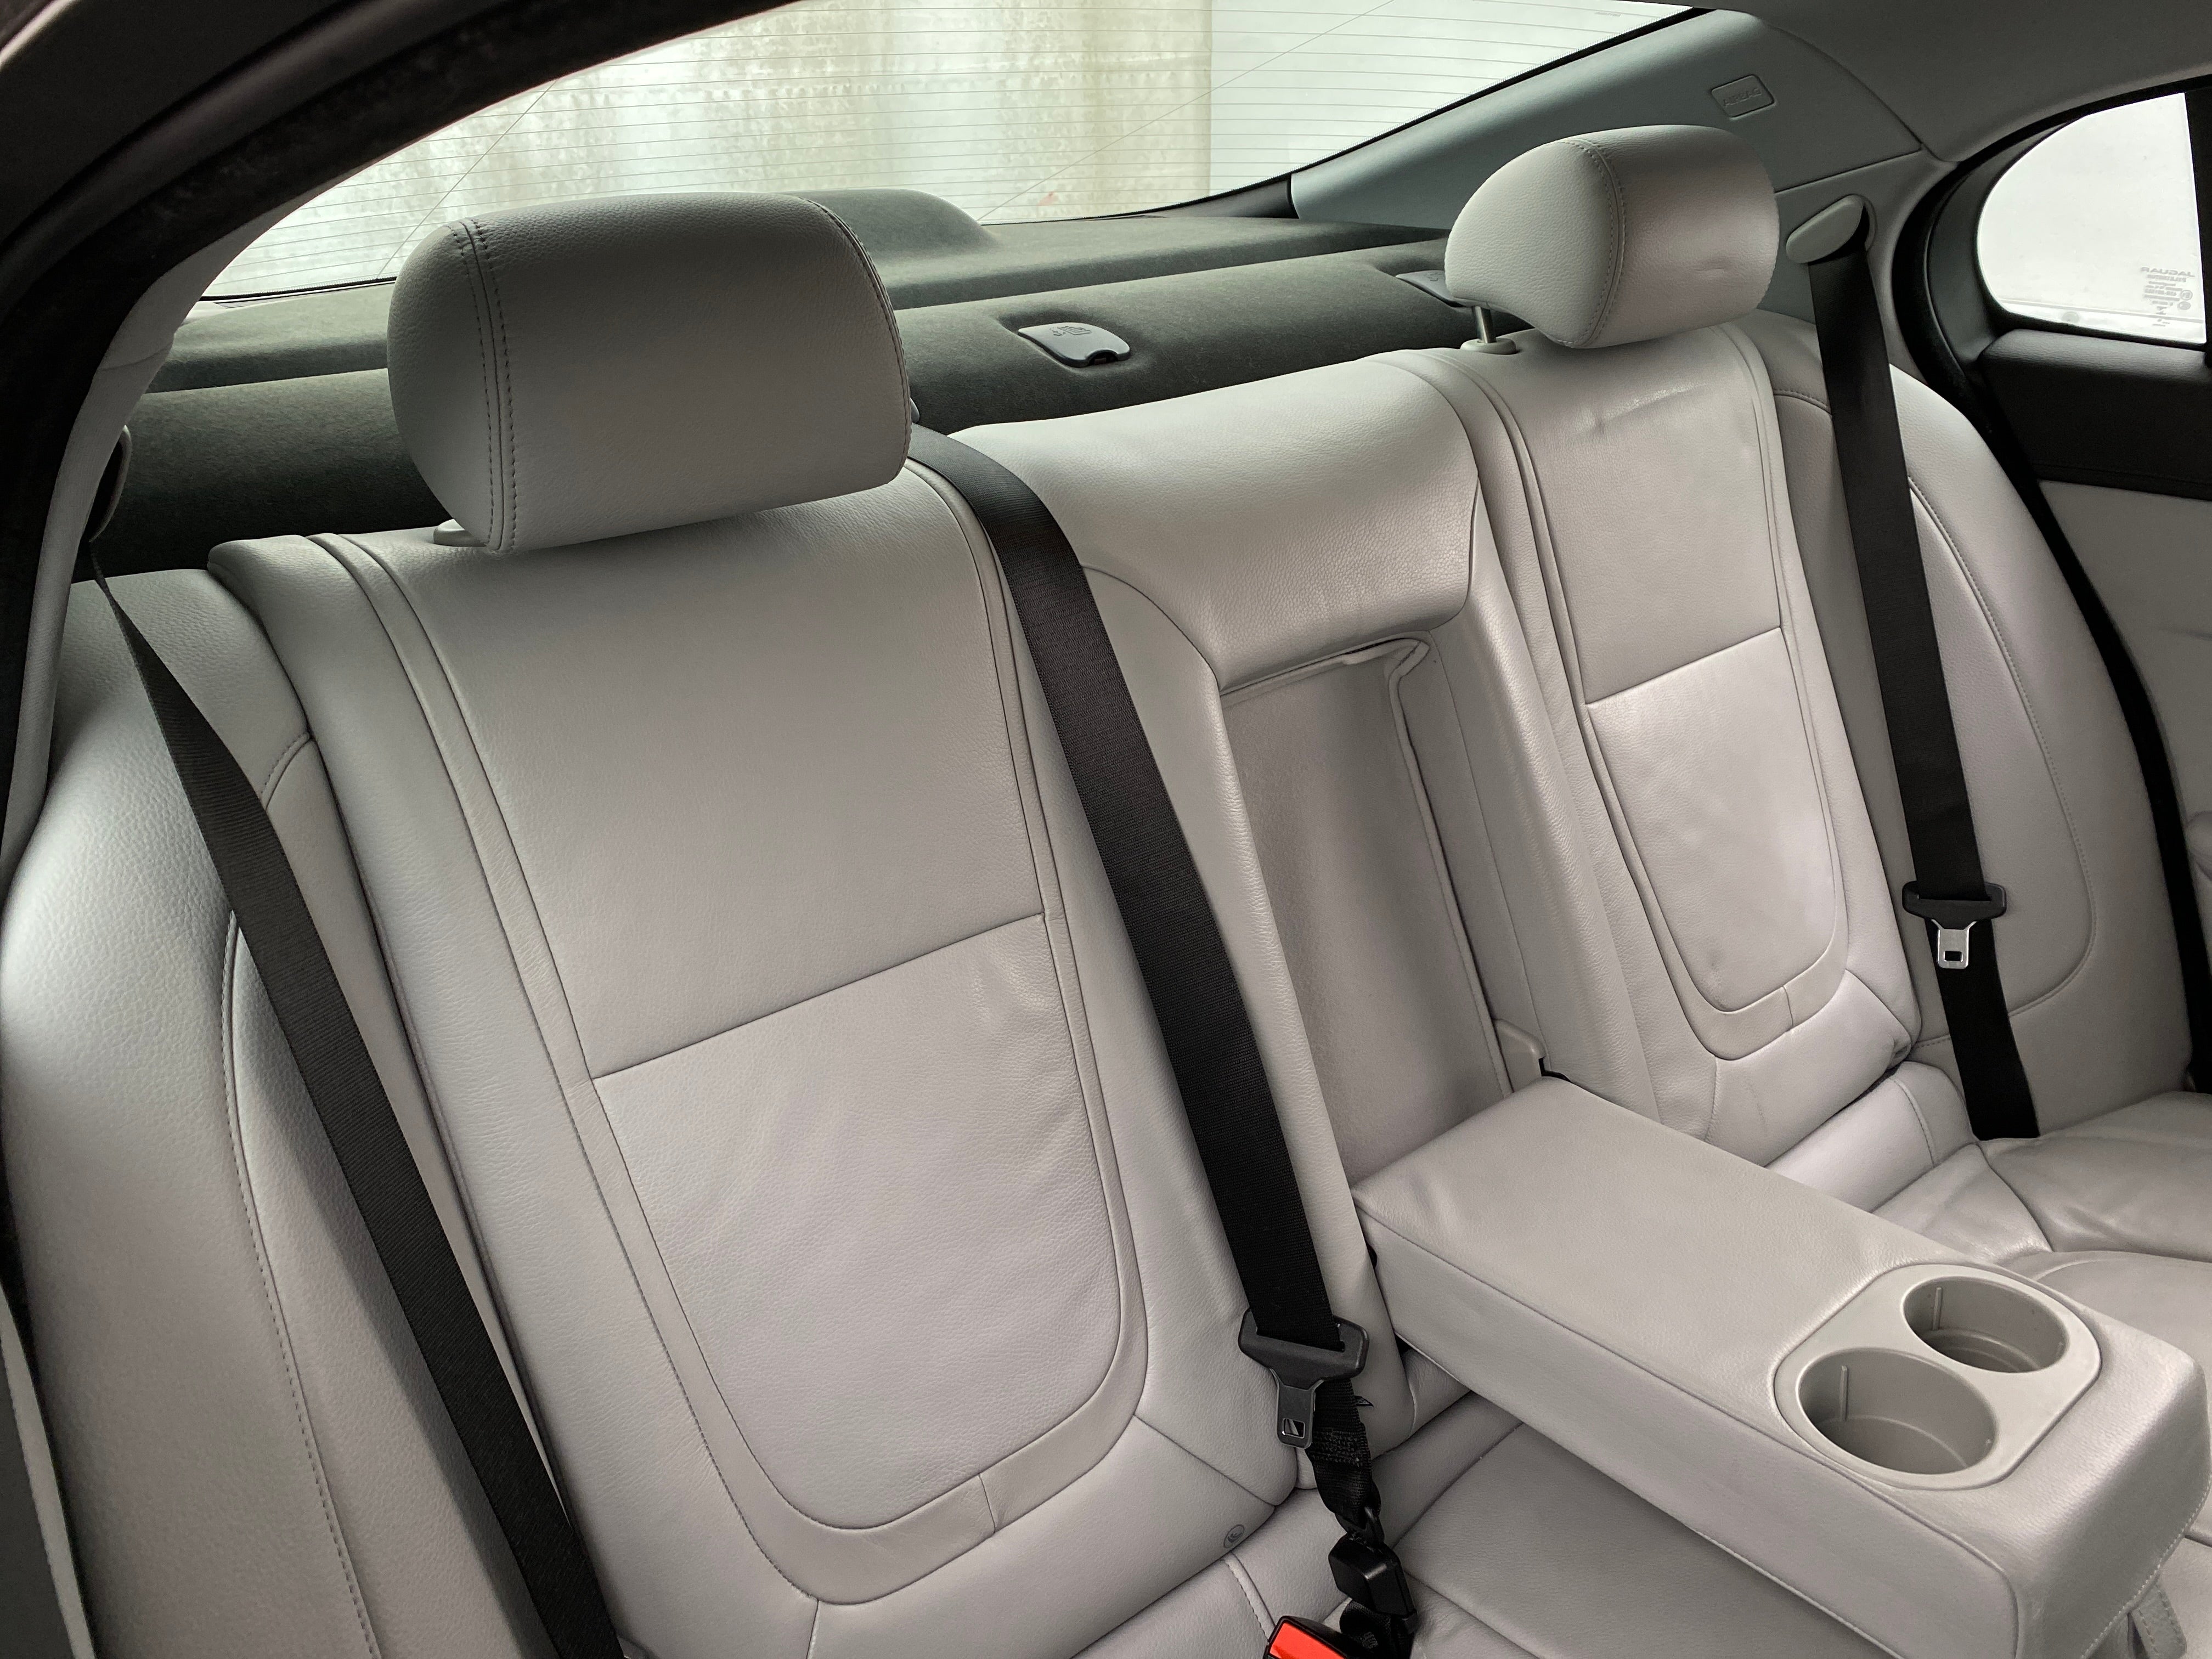 How much does it cost to remove stains from car seats? - Luxury's Lane